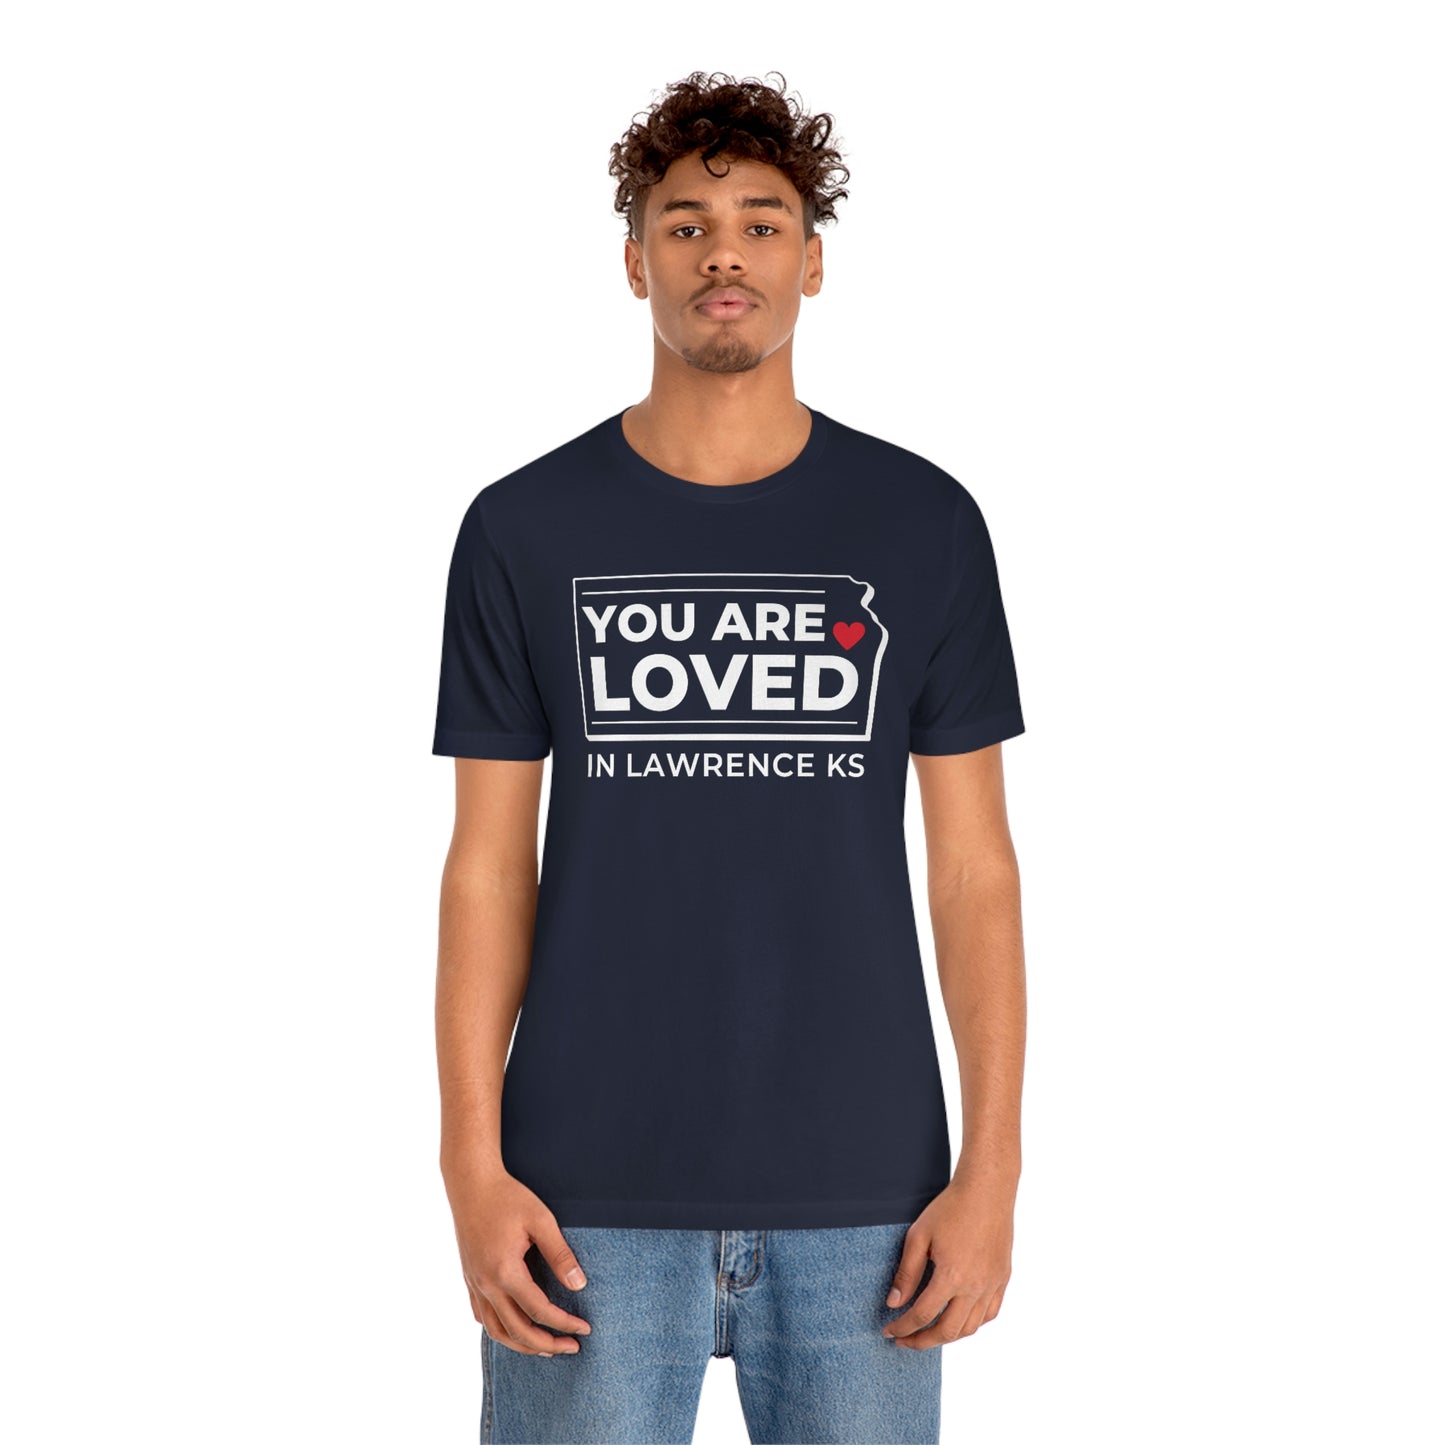 "YOU ARE LOVED ❤️ in Lawrence KS" T-Shirt  [NAVY BLUE]